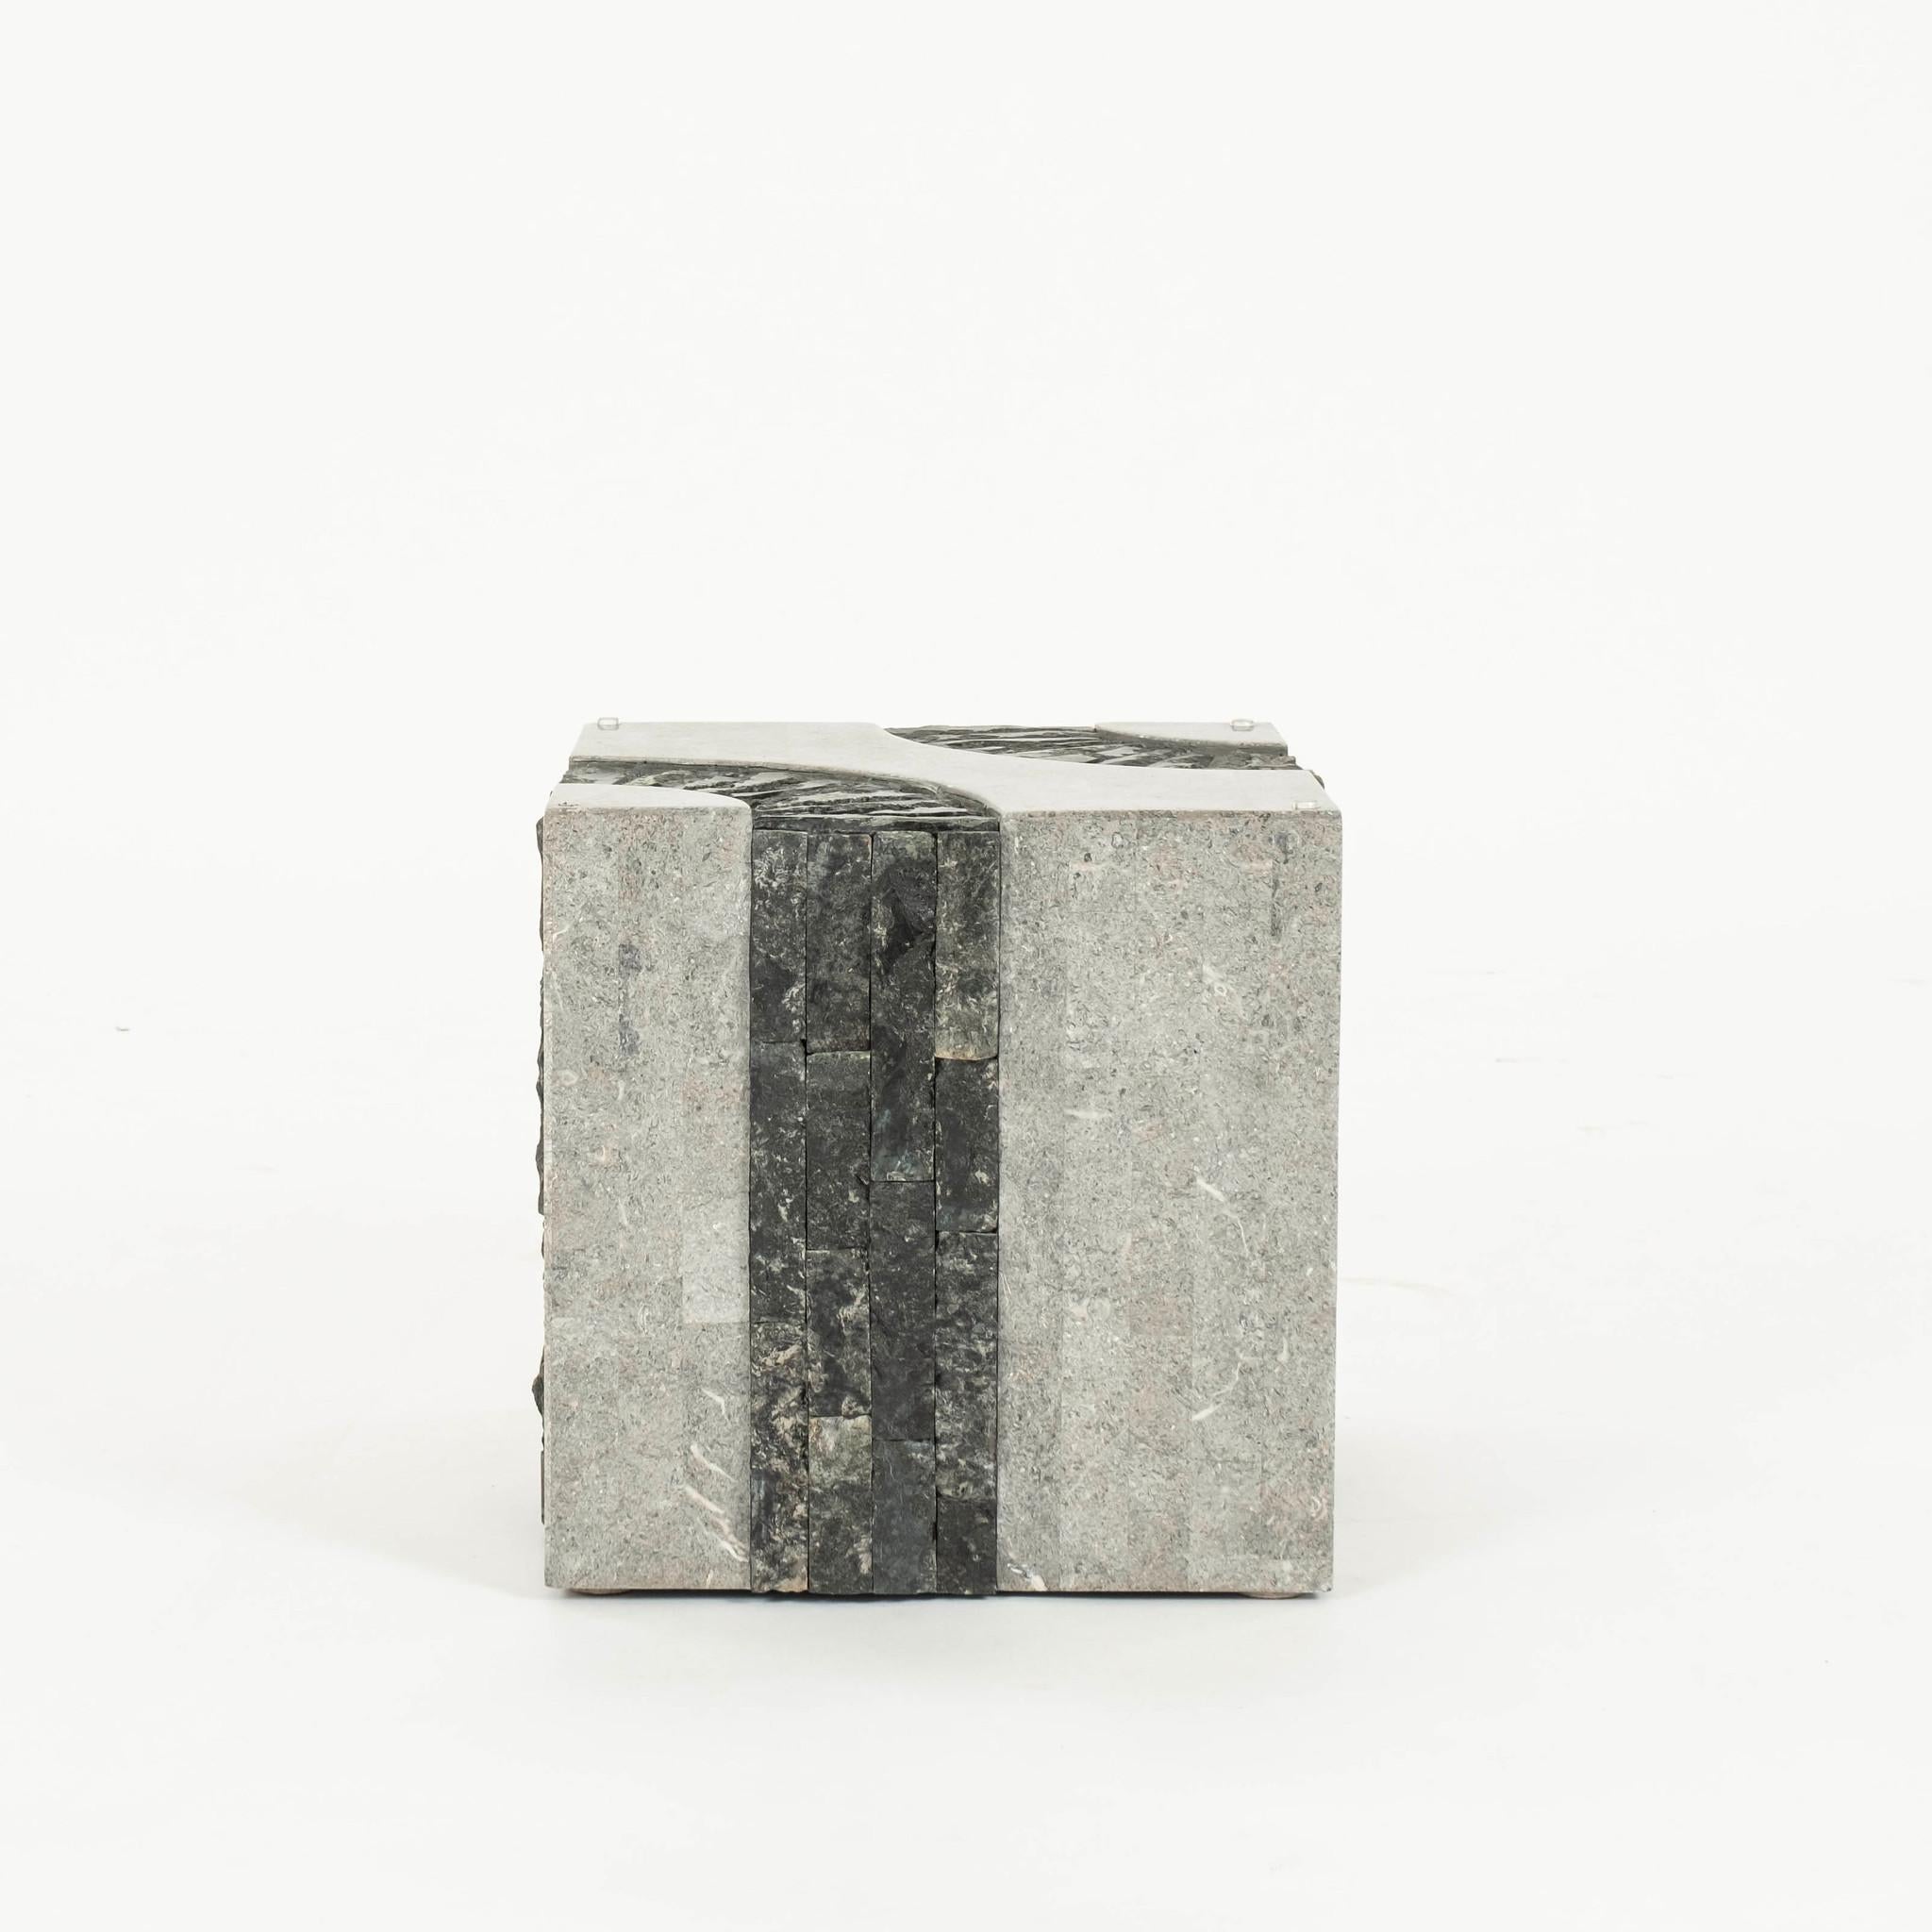 20th Century honed  grey white stone (possibly granite) cube side table banded up and over with rough cut edges in black.